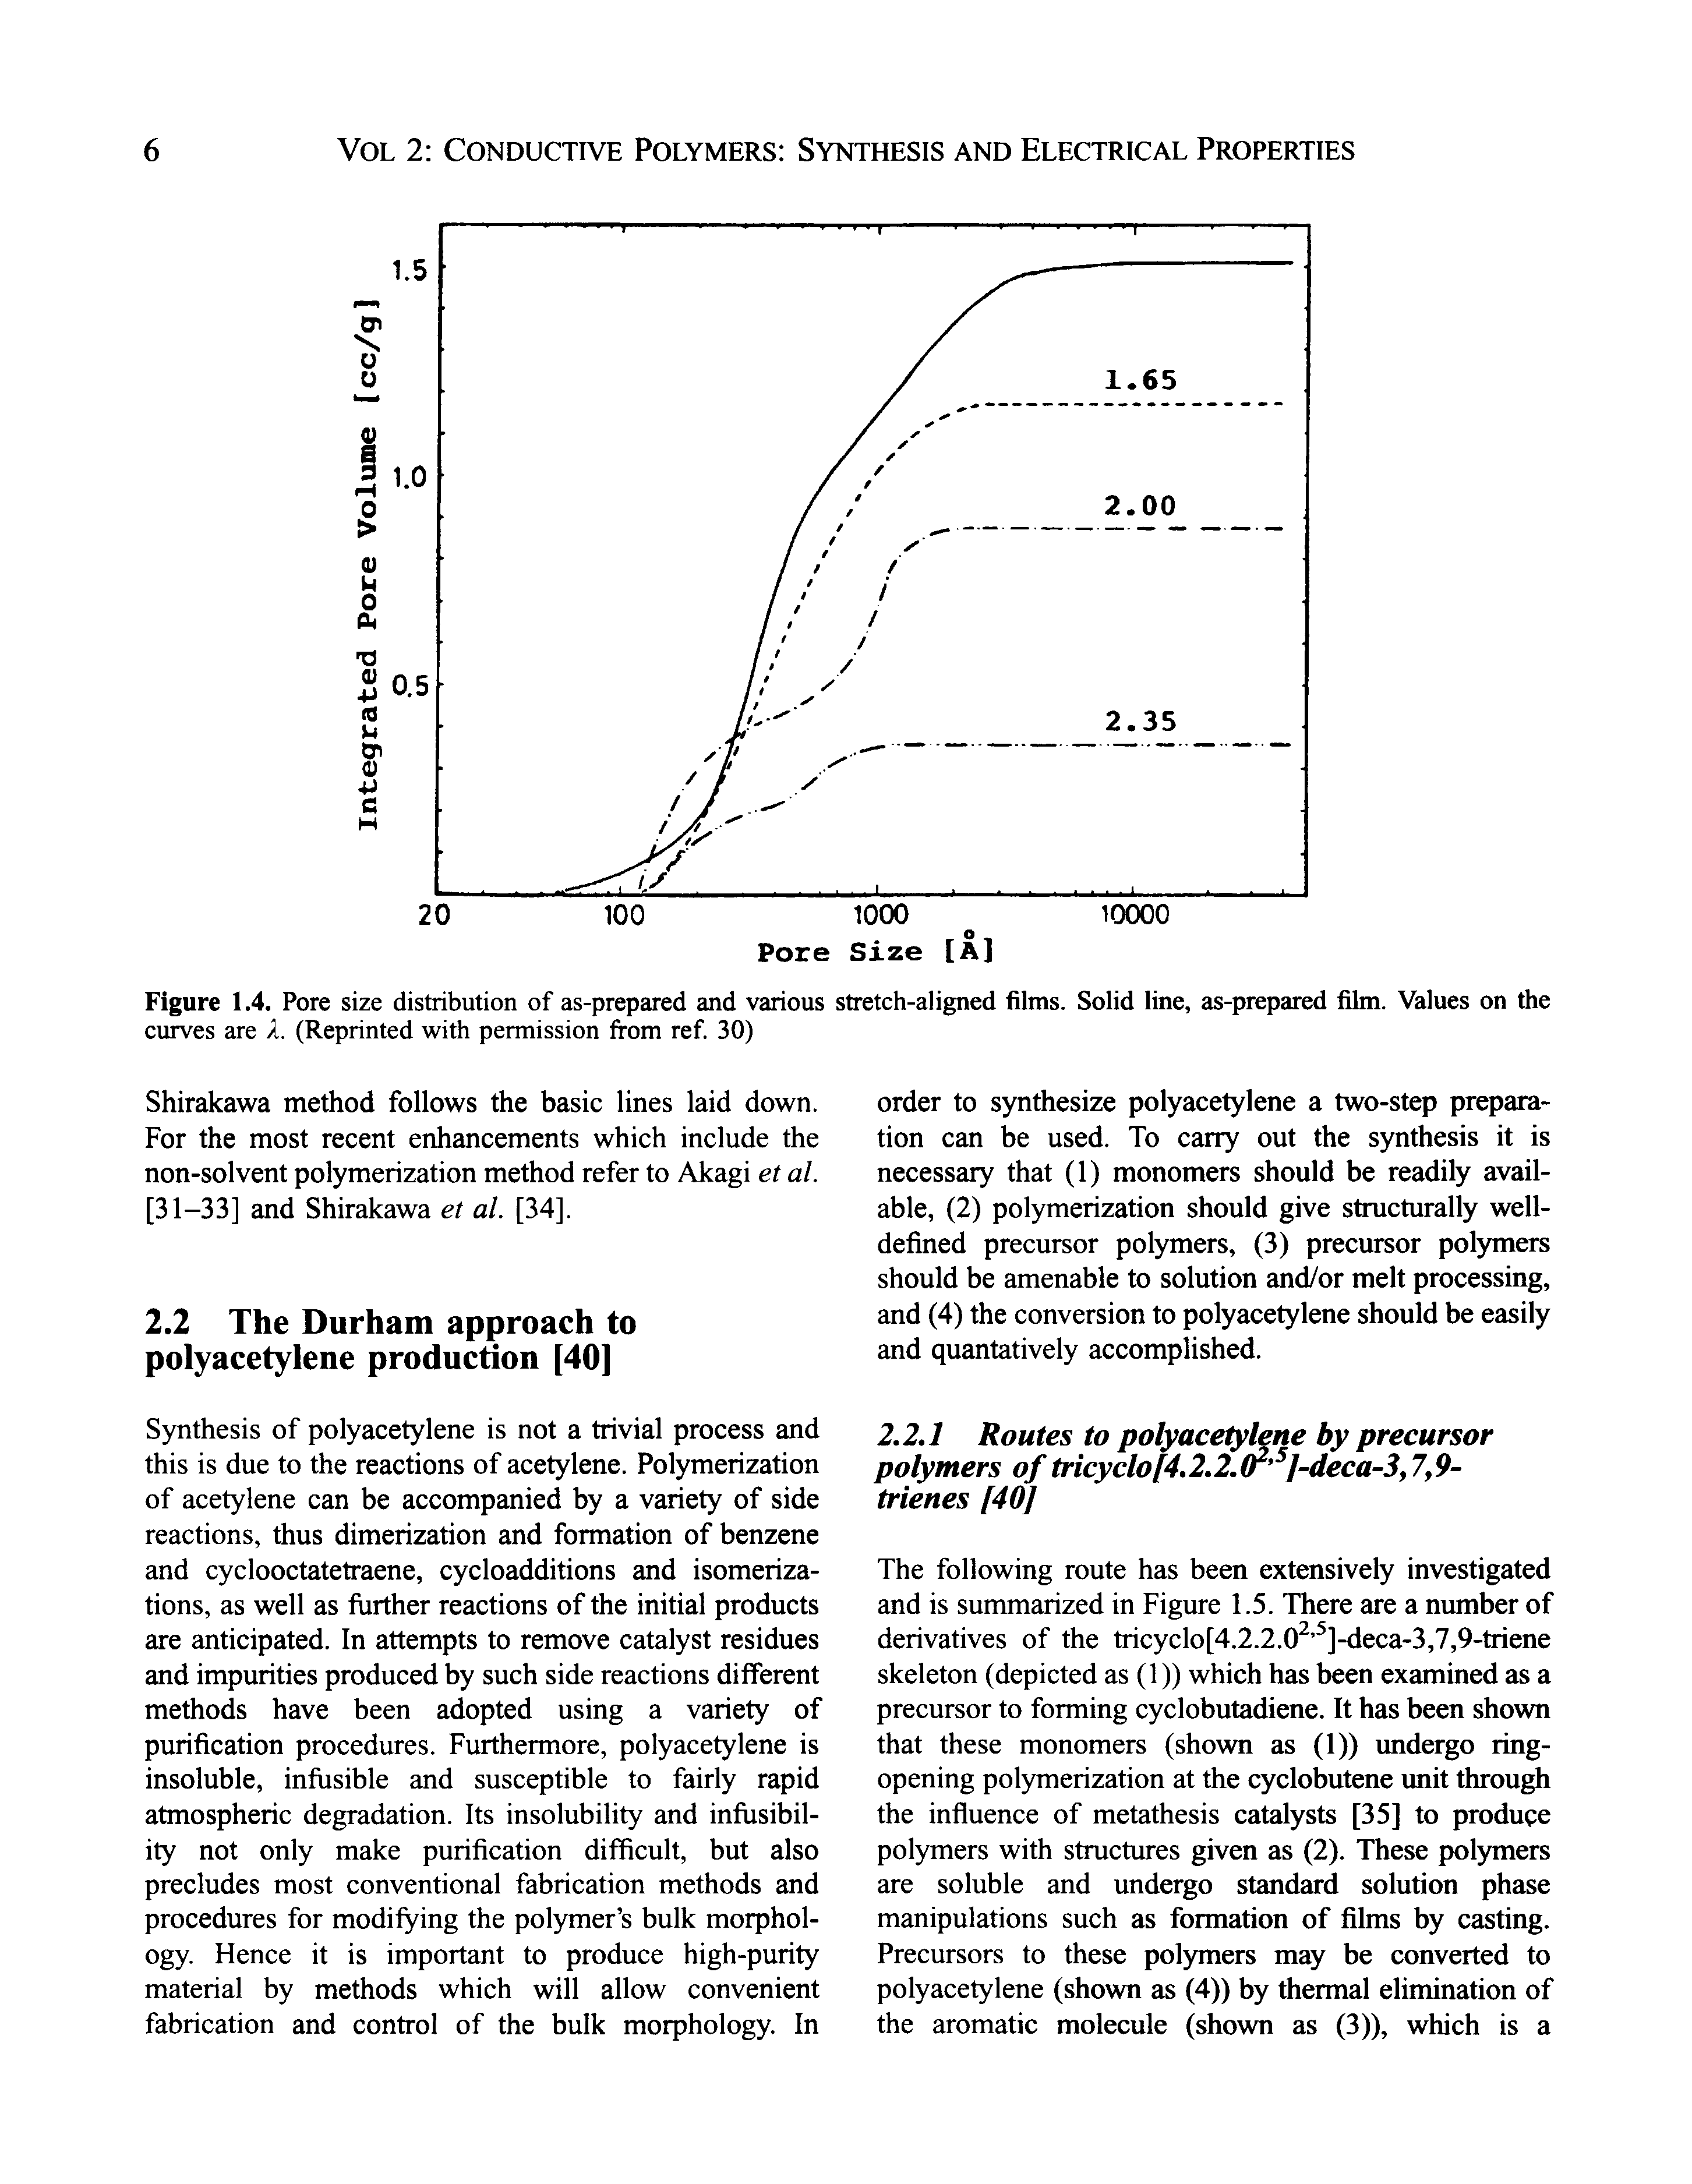 Figure 1.4. Pore size distribution of as-prepared and various stretch-aligned films. Solid line, as-prepared film. Values on the...